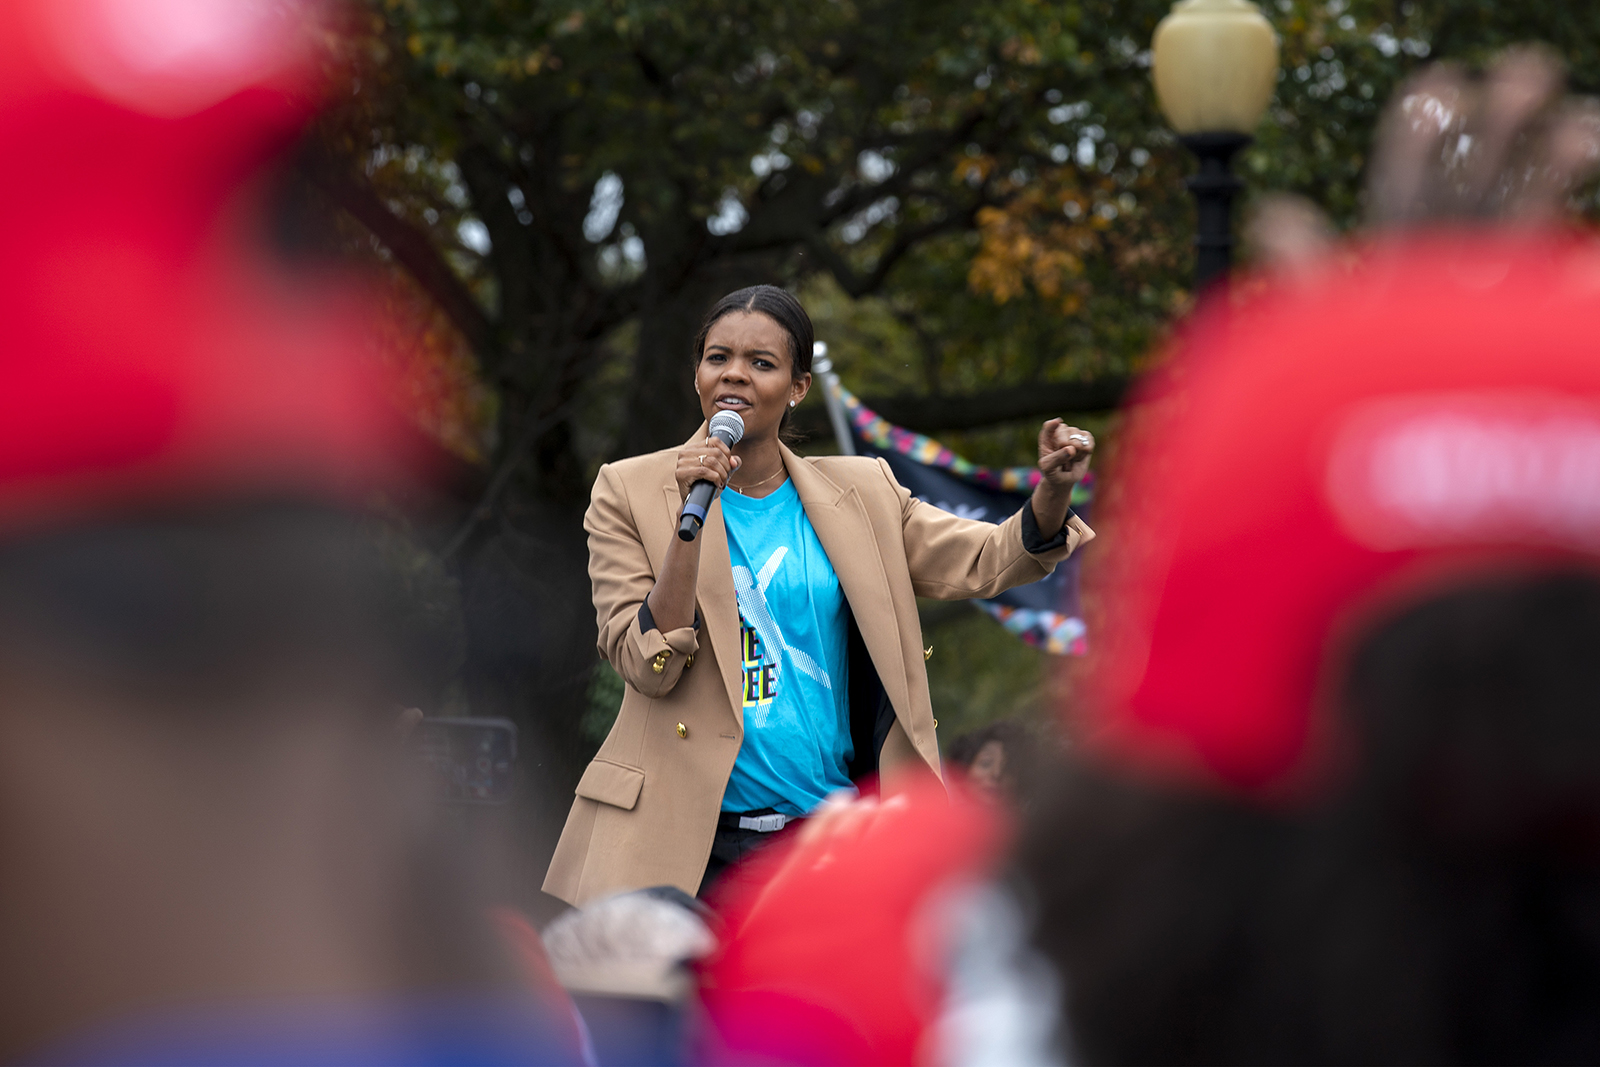 Conservative commentator and political activist Candace Owens speaks during a rally at The Ellipse at the White House on Saturday, Oct. 10, 2020, in Washington.  (AP Photo/Jose Luis Magana)